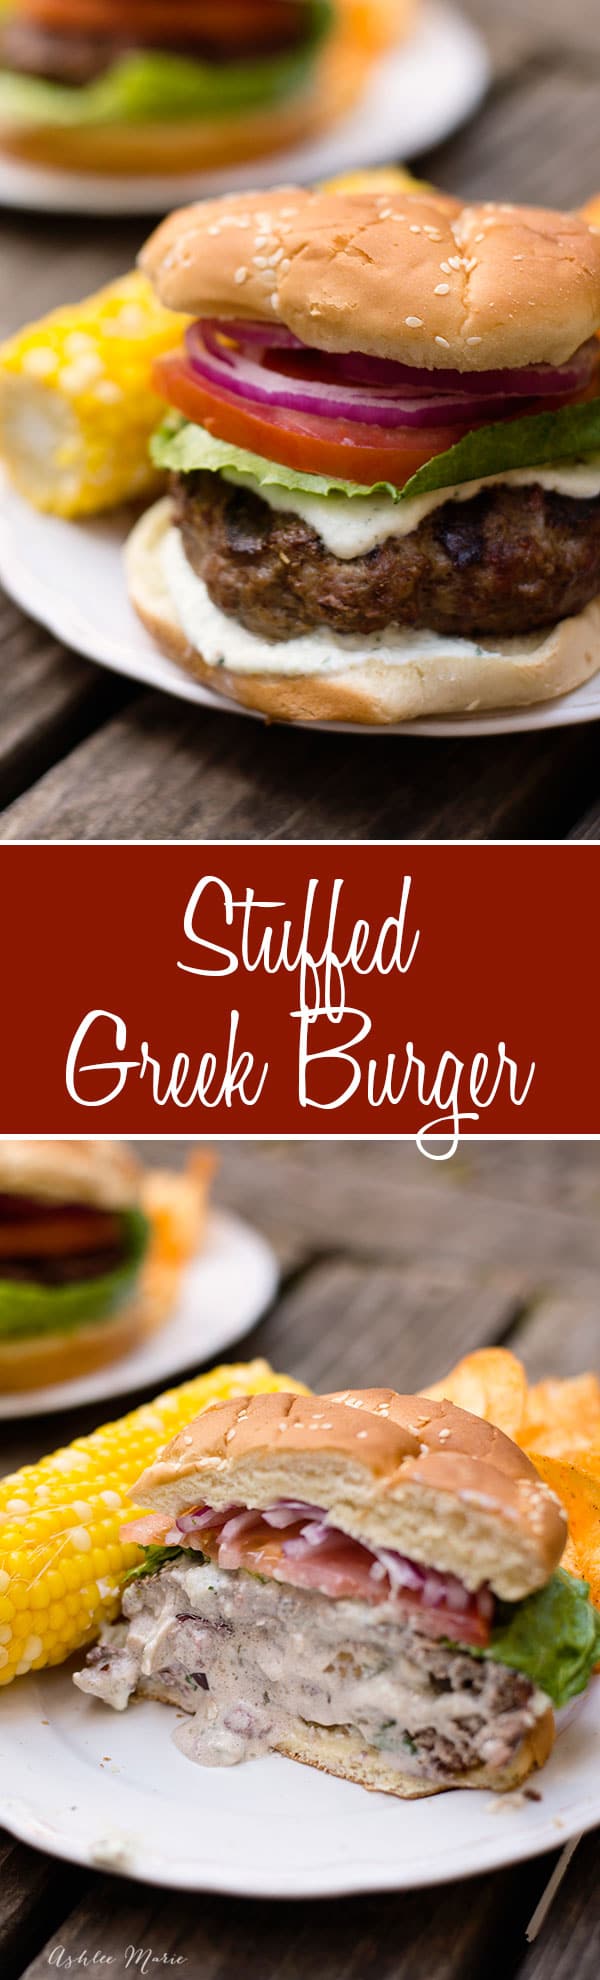 this stuffed greek burger is made with lamb, beef and pork and filled with goat cheese, feta grilled onions and greek olives. Top with tzatziki sauce, tomatoes and red onions for a great greek flavor.